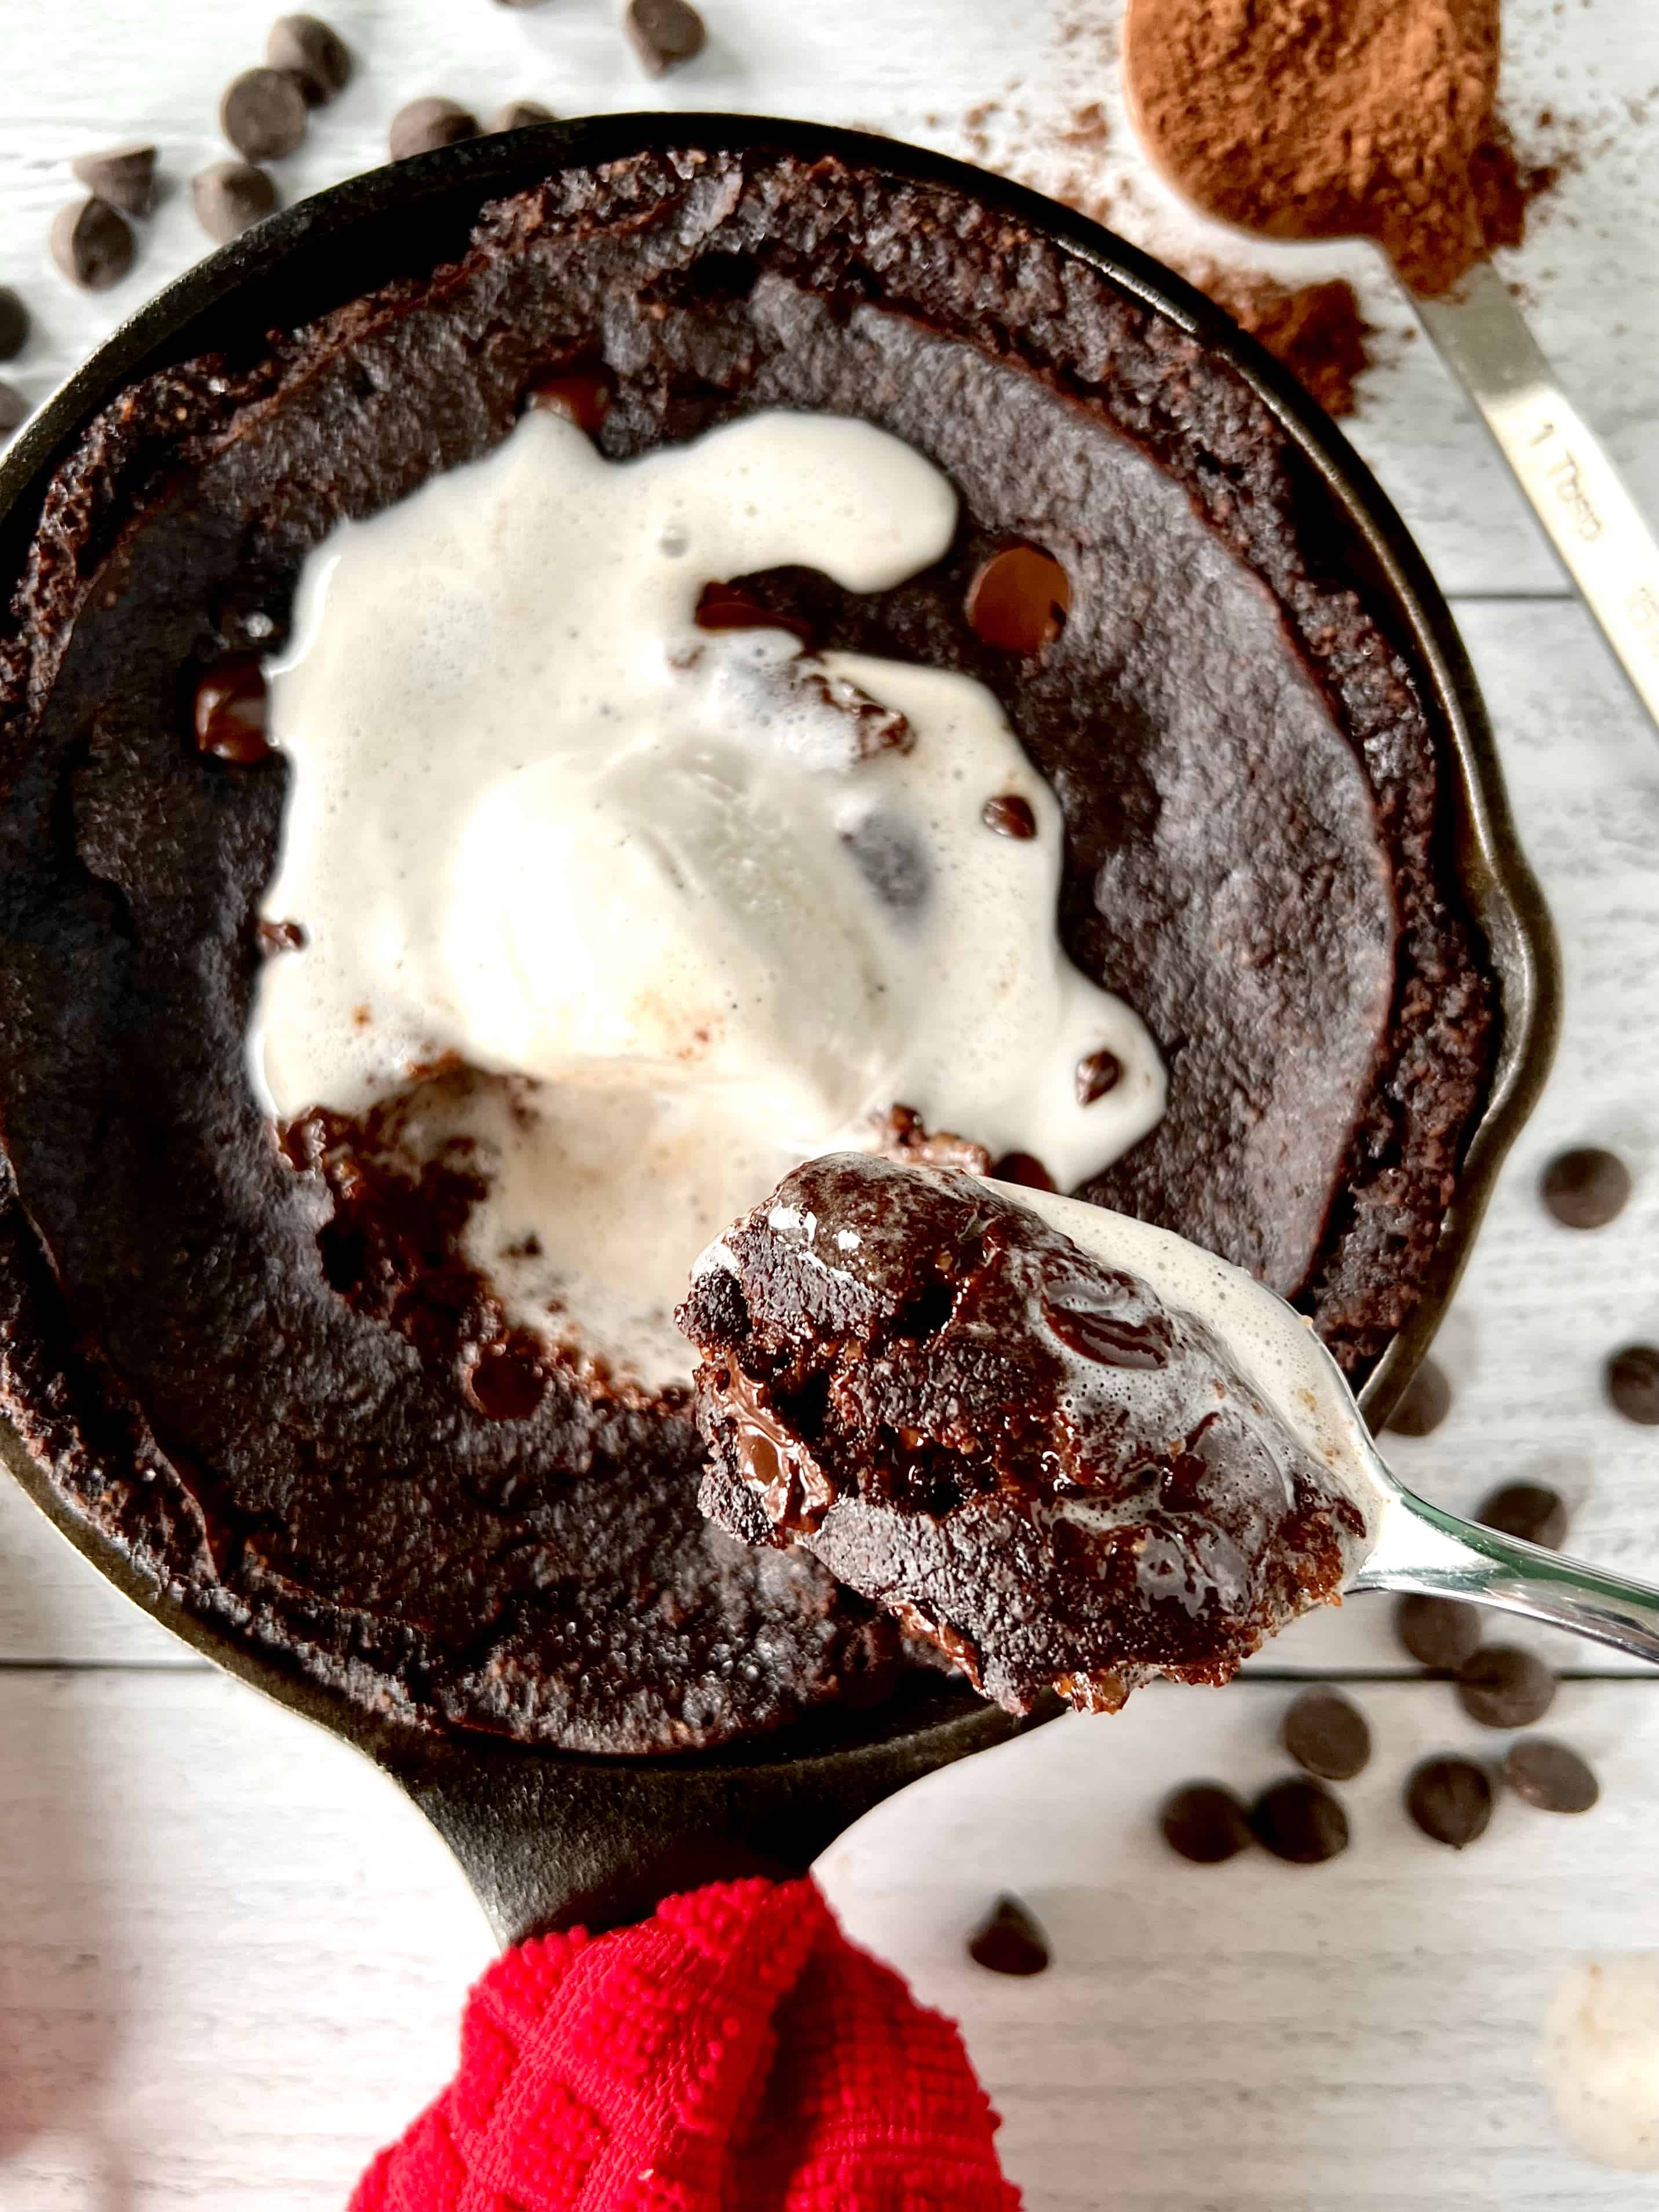 Healthy chocolate cake in a cast iron skillet topped with vanilla ice cream, with a spoon holding up a scoop of the cake and ice cream.